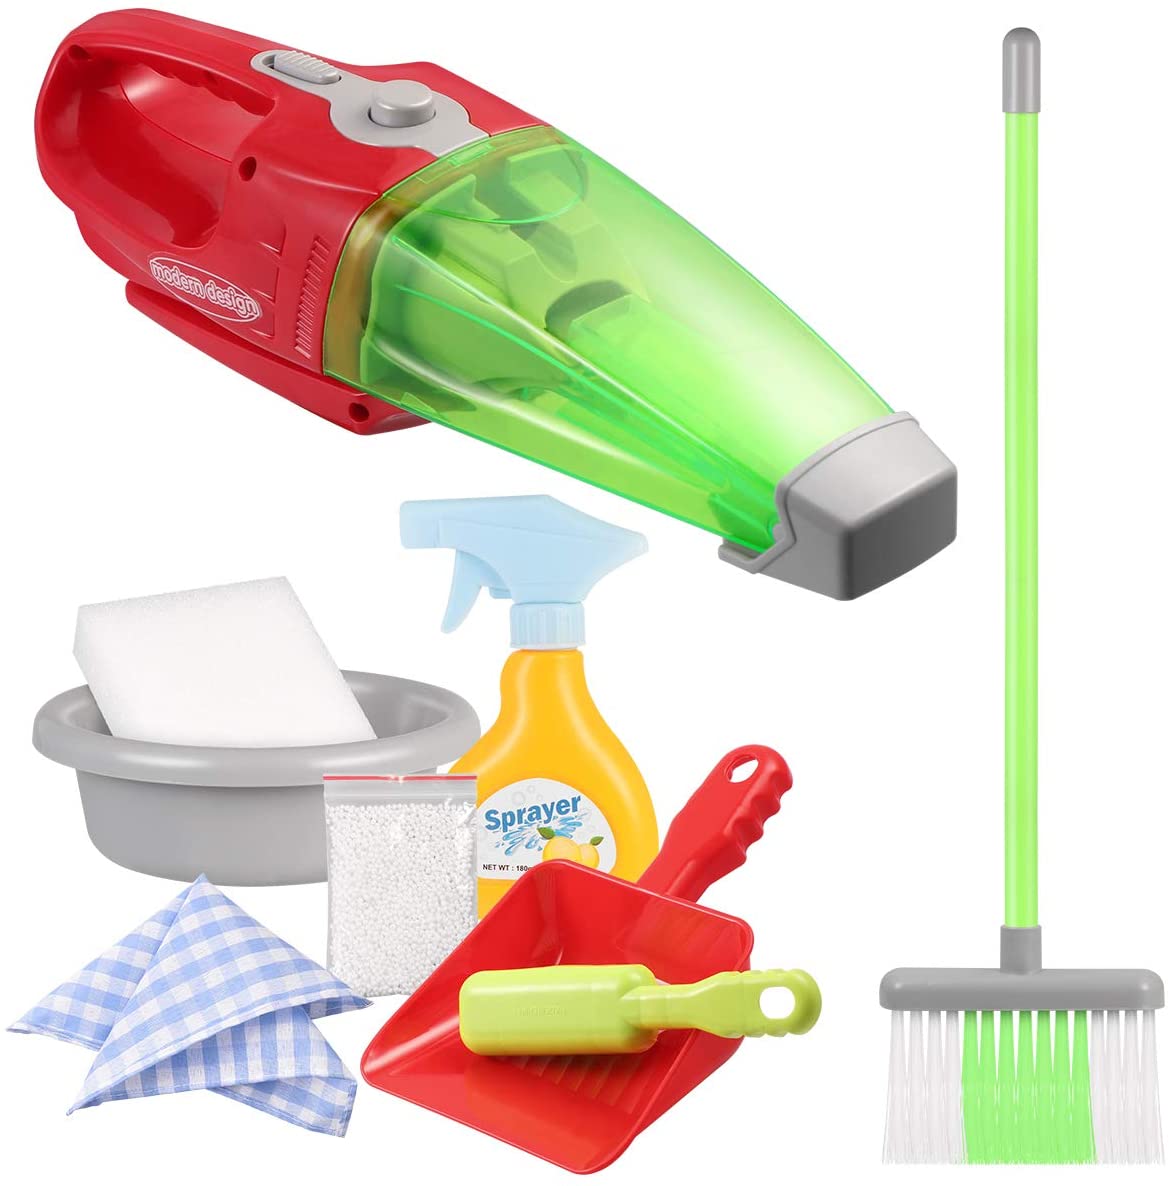 Household Pretend Play Toy Kit Mini Vacuum Cleaner Cleaning Mop Broom Tools Accessories Toys Ware Toys for Toddlers Fun Activity Sensory Kids Toys 